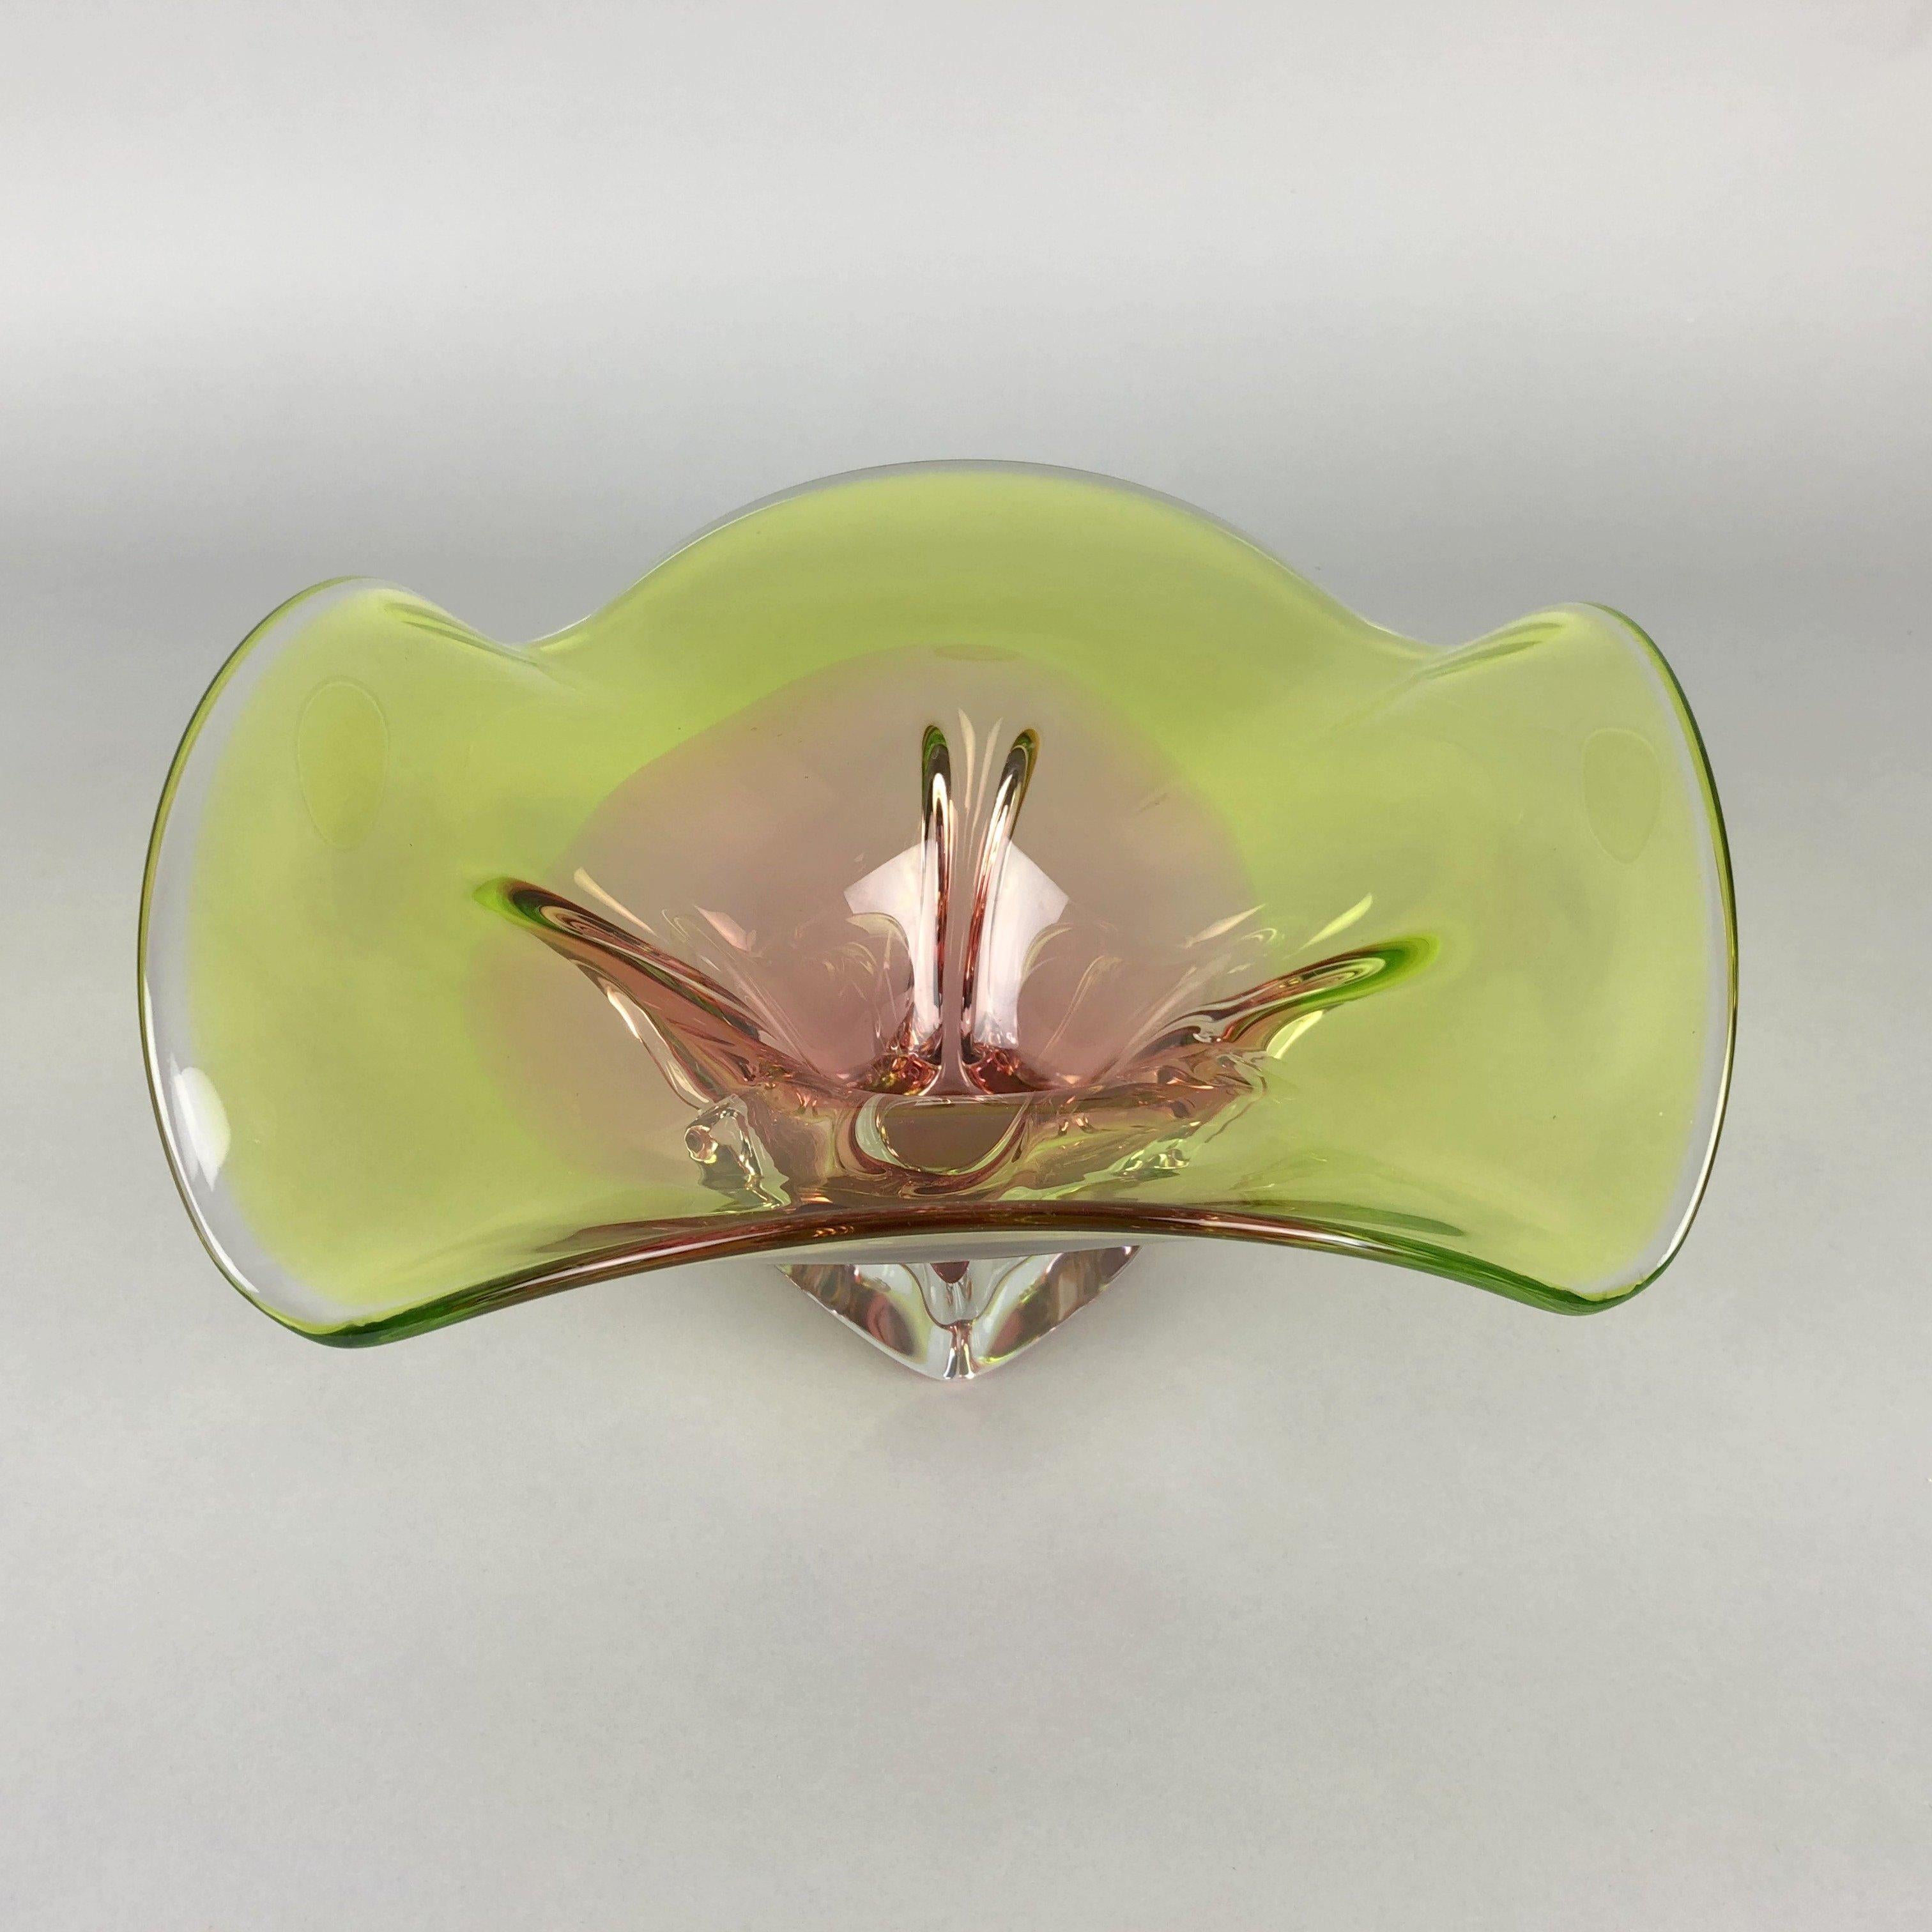 Vintage Art Glass Bowl by Chribska Glasswork, 1960s In Good Condition For Sale In Praha, CZ